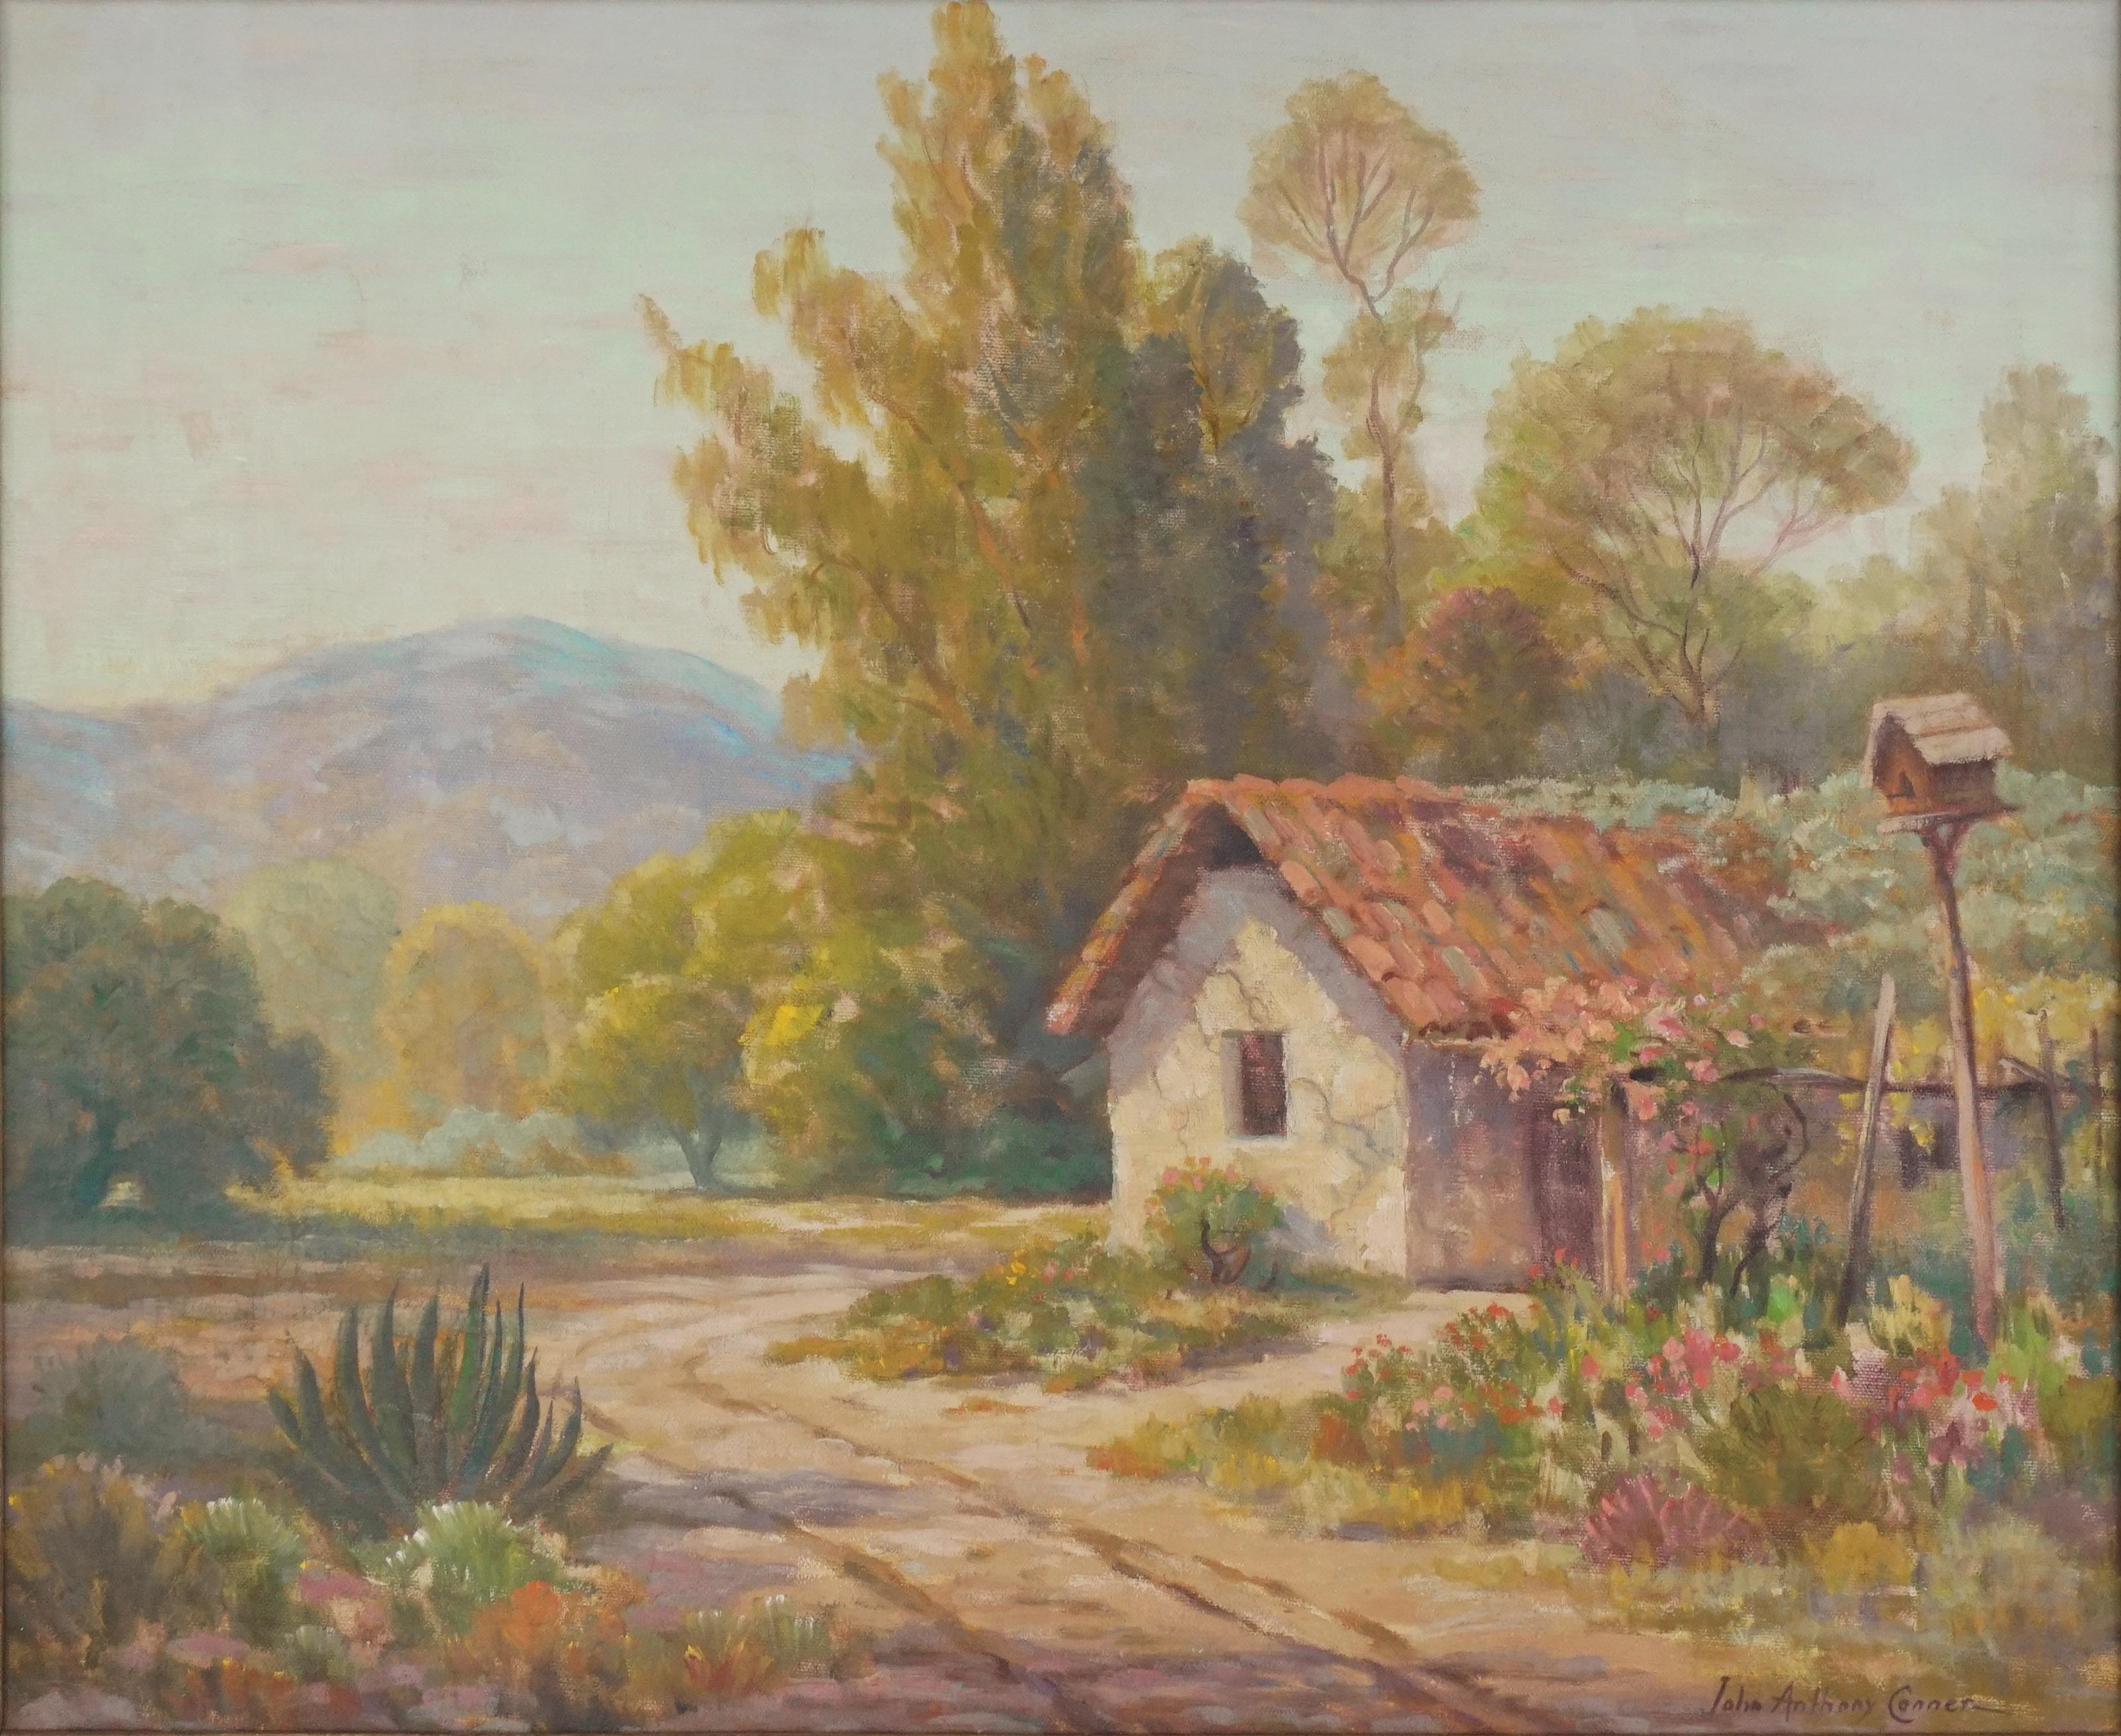 Mid Century Adobe Home Near Tujunga, Southern California - Painting by John Anthony Conner